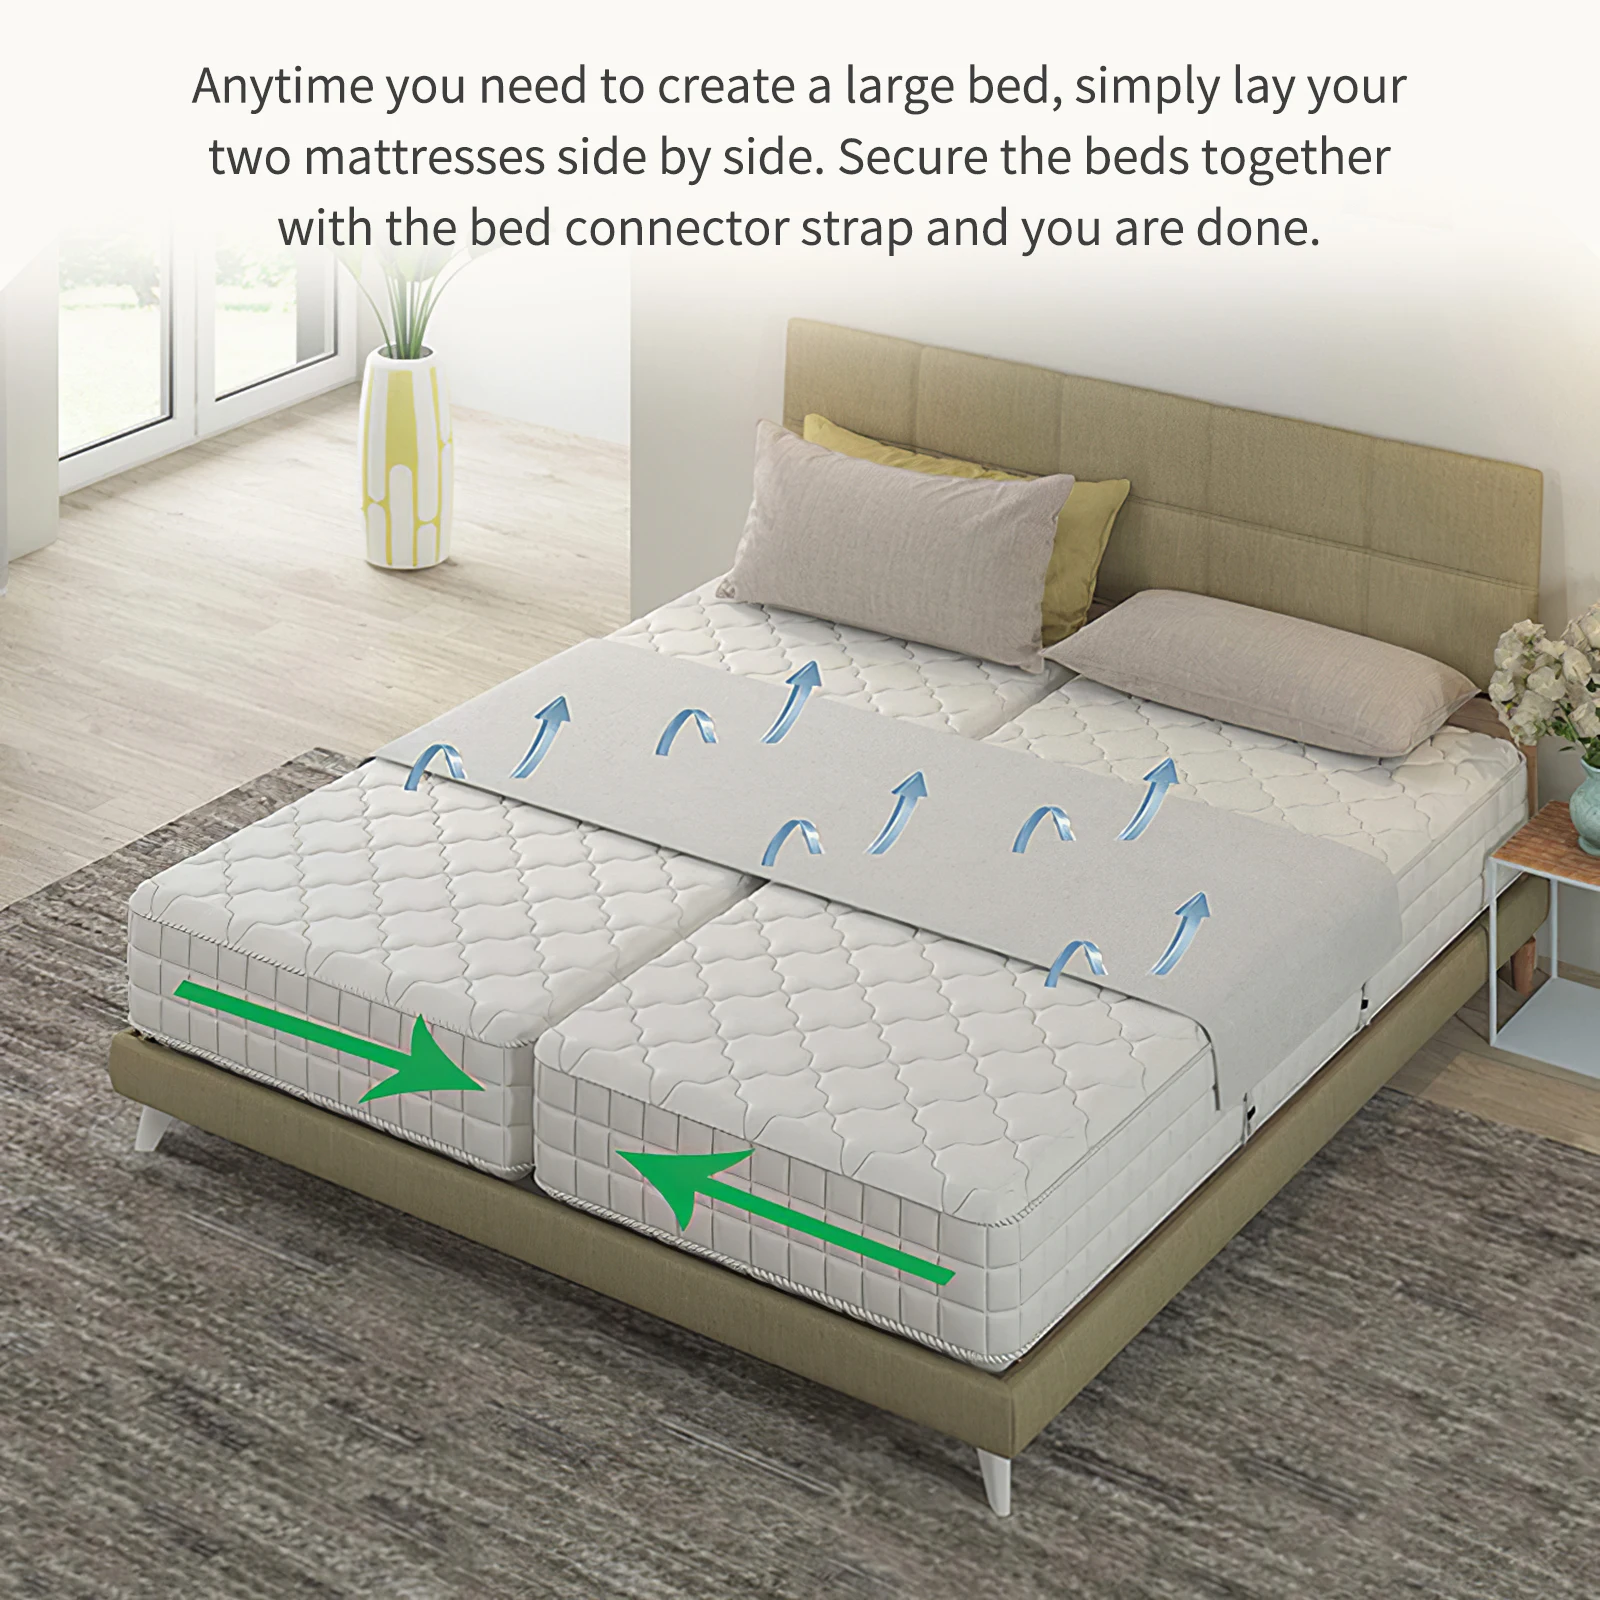 Bed Bridge Twin To King Converter Kit Bed Filler To Make Twin Beds Into King  ConnectorTwin Bed Connector Mattress Connector - AliExpress